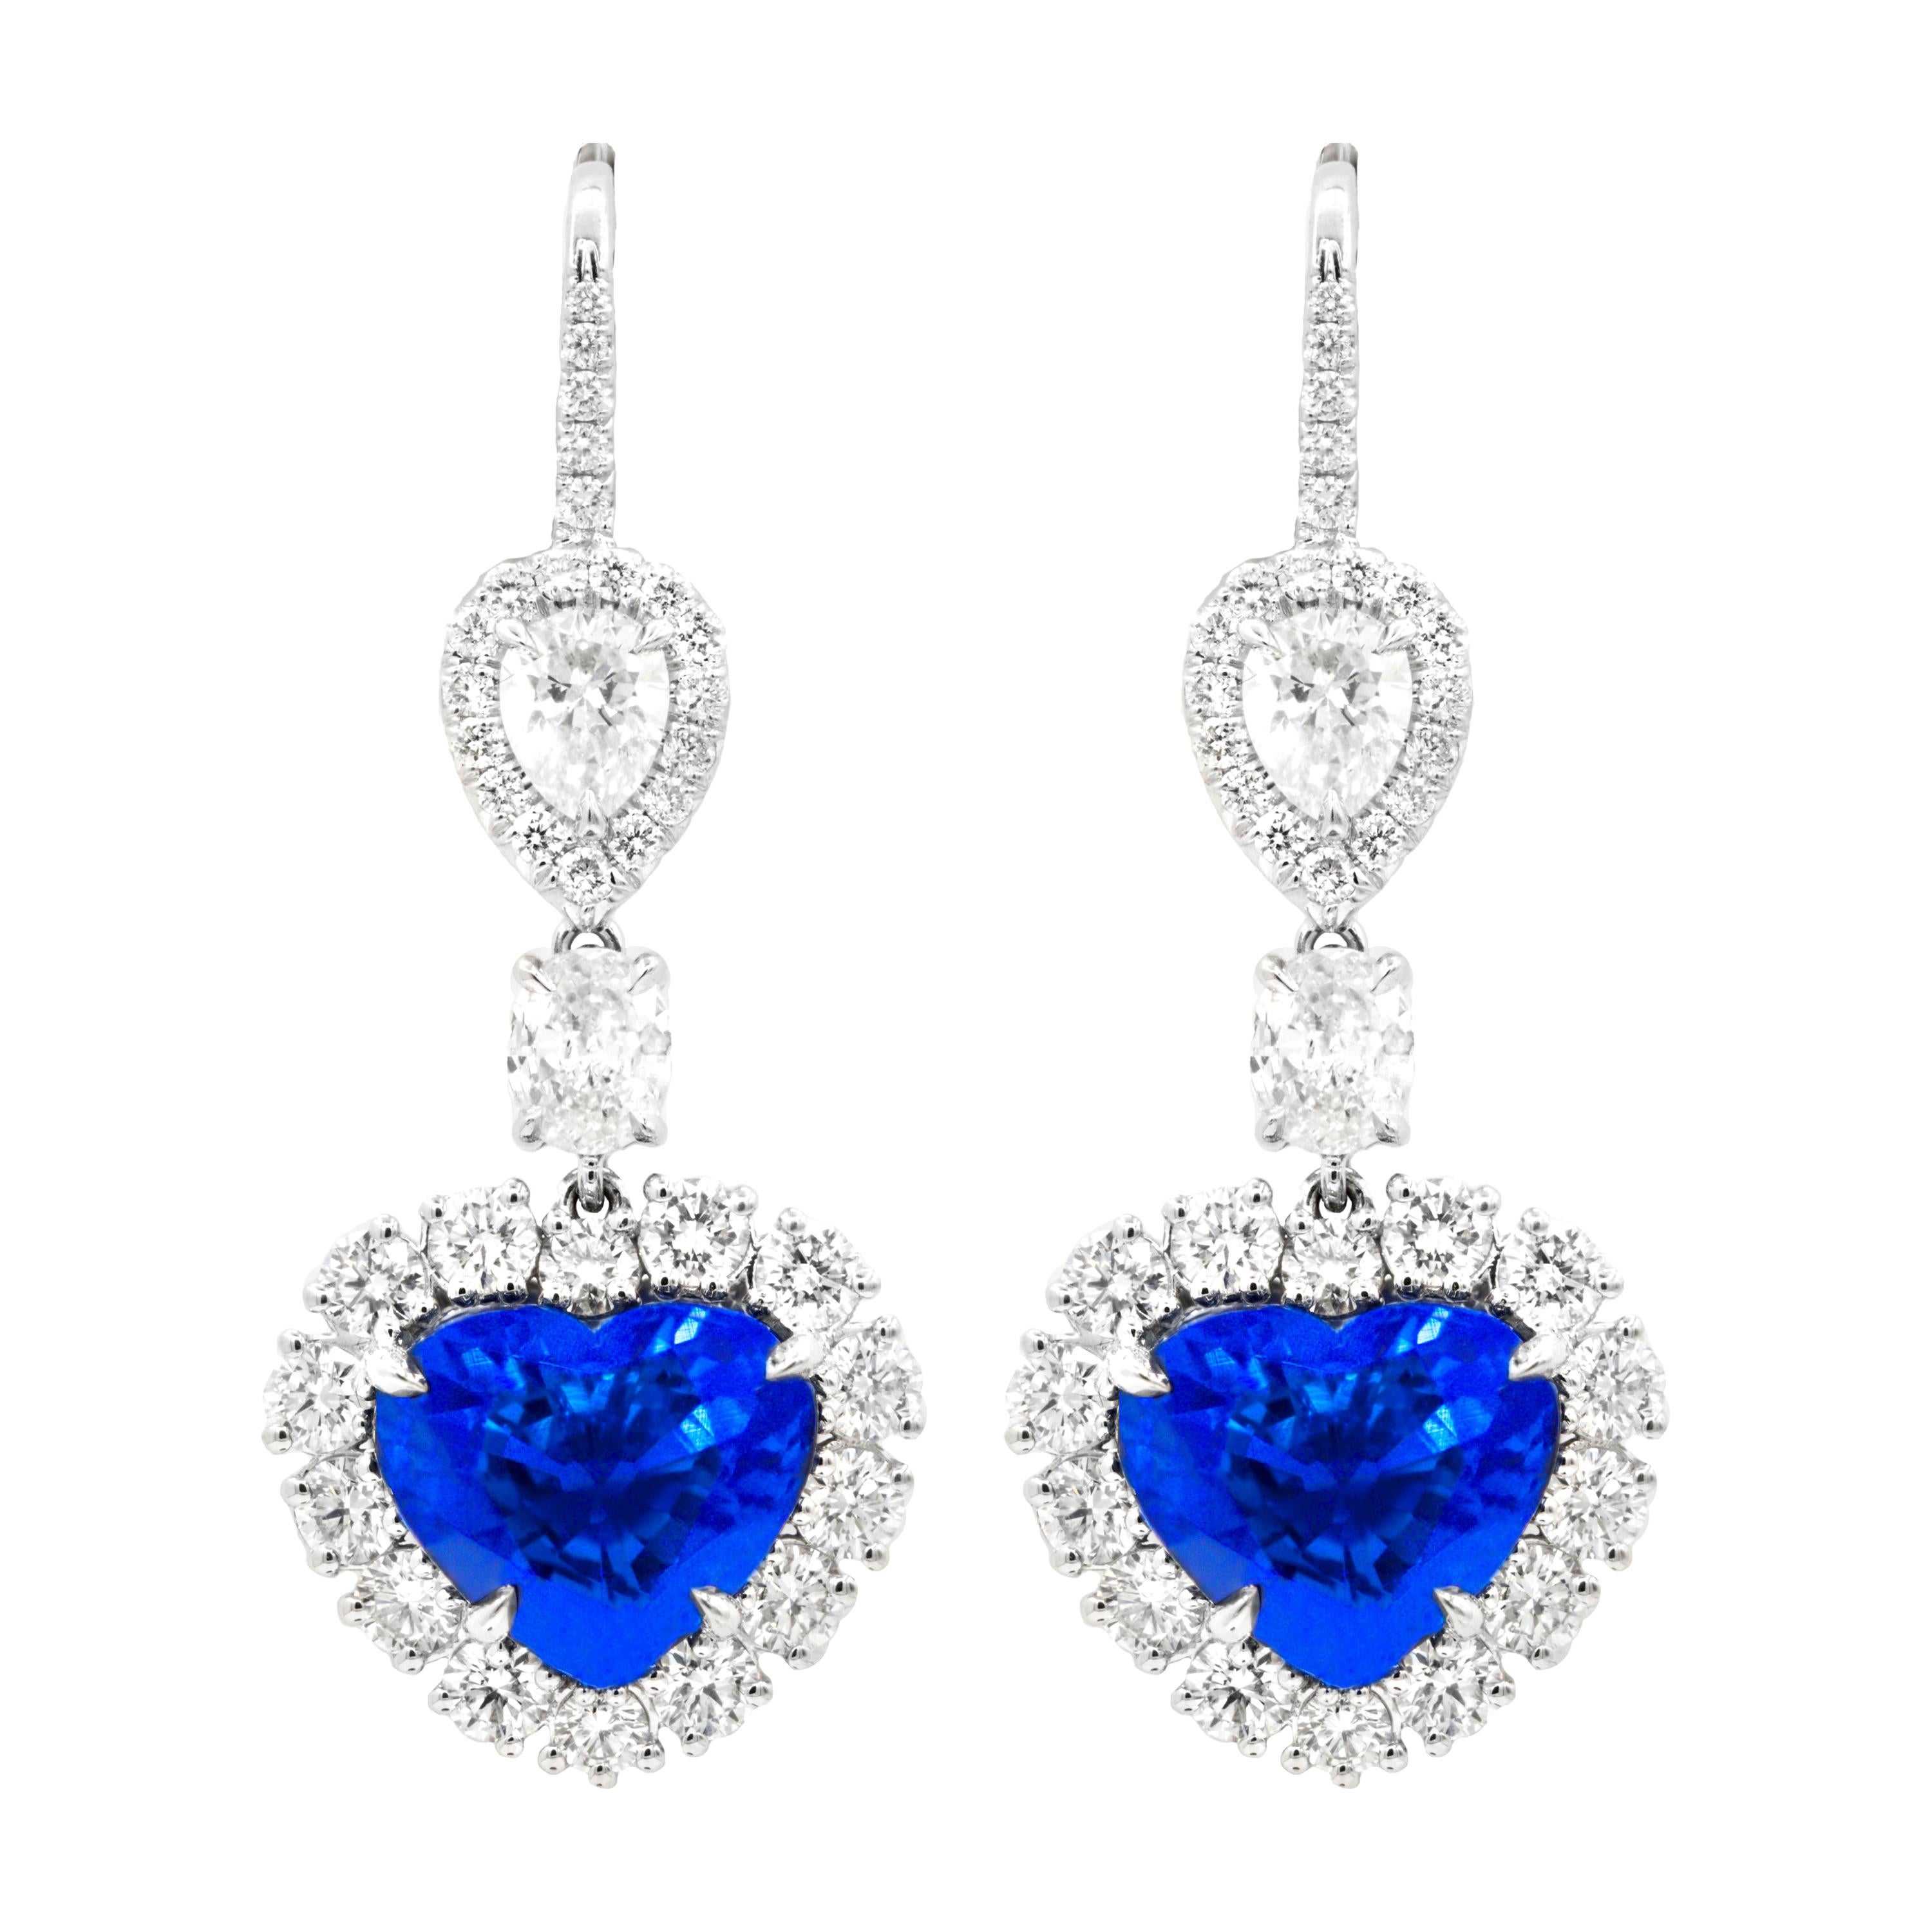 Diana M. 18kt White Gold Earrings with Heart Shape Sapphire & Diamonds For Sale